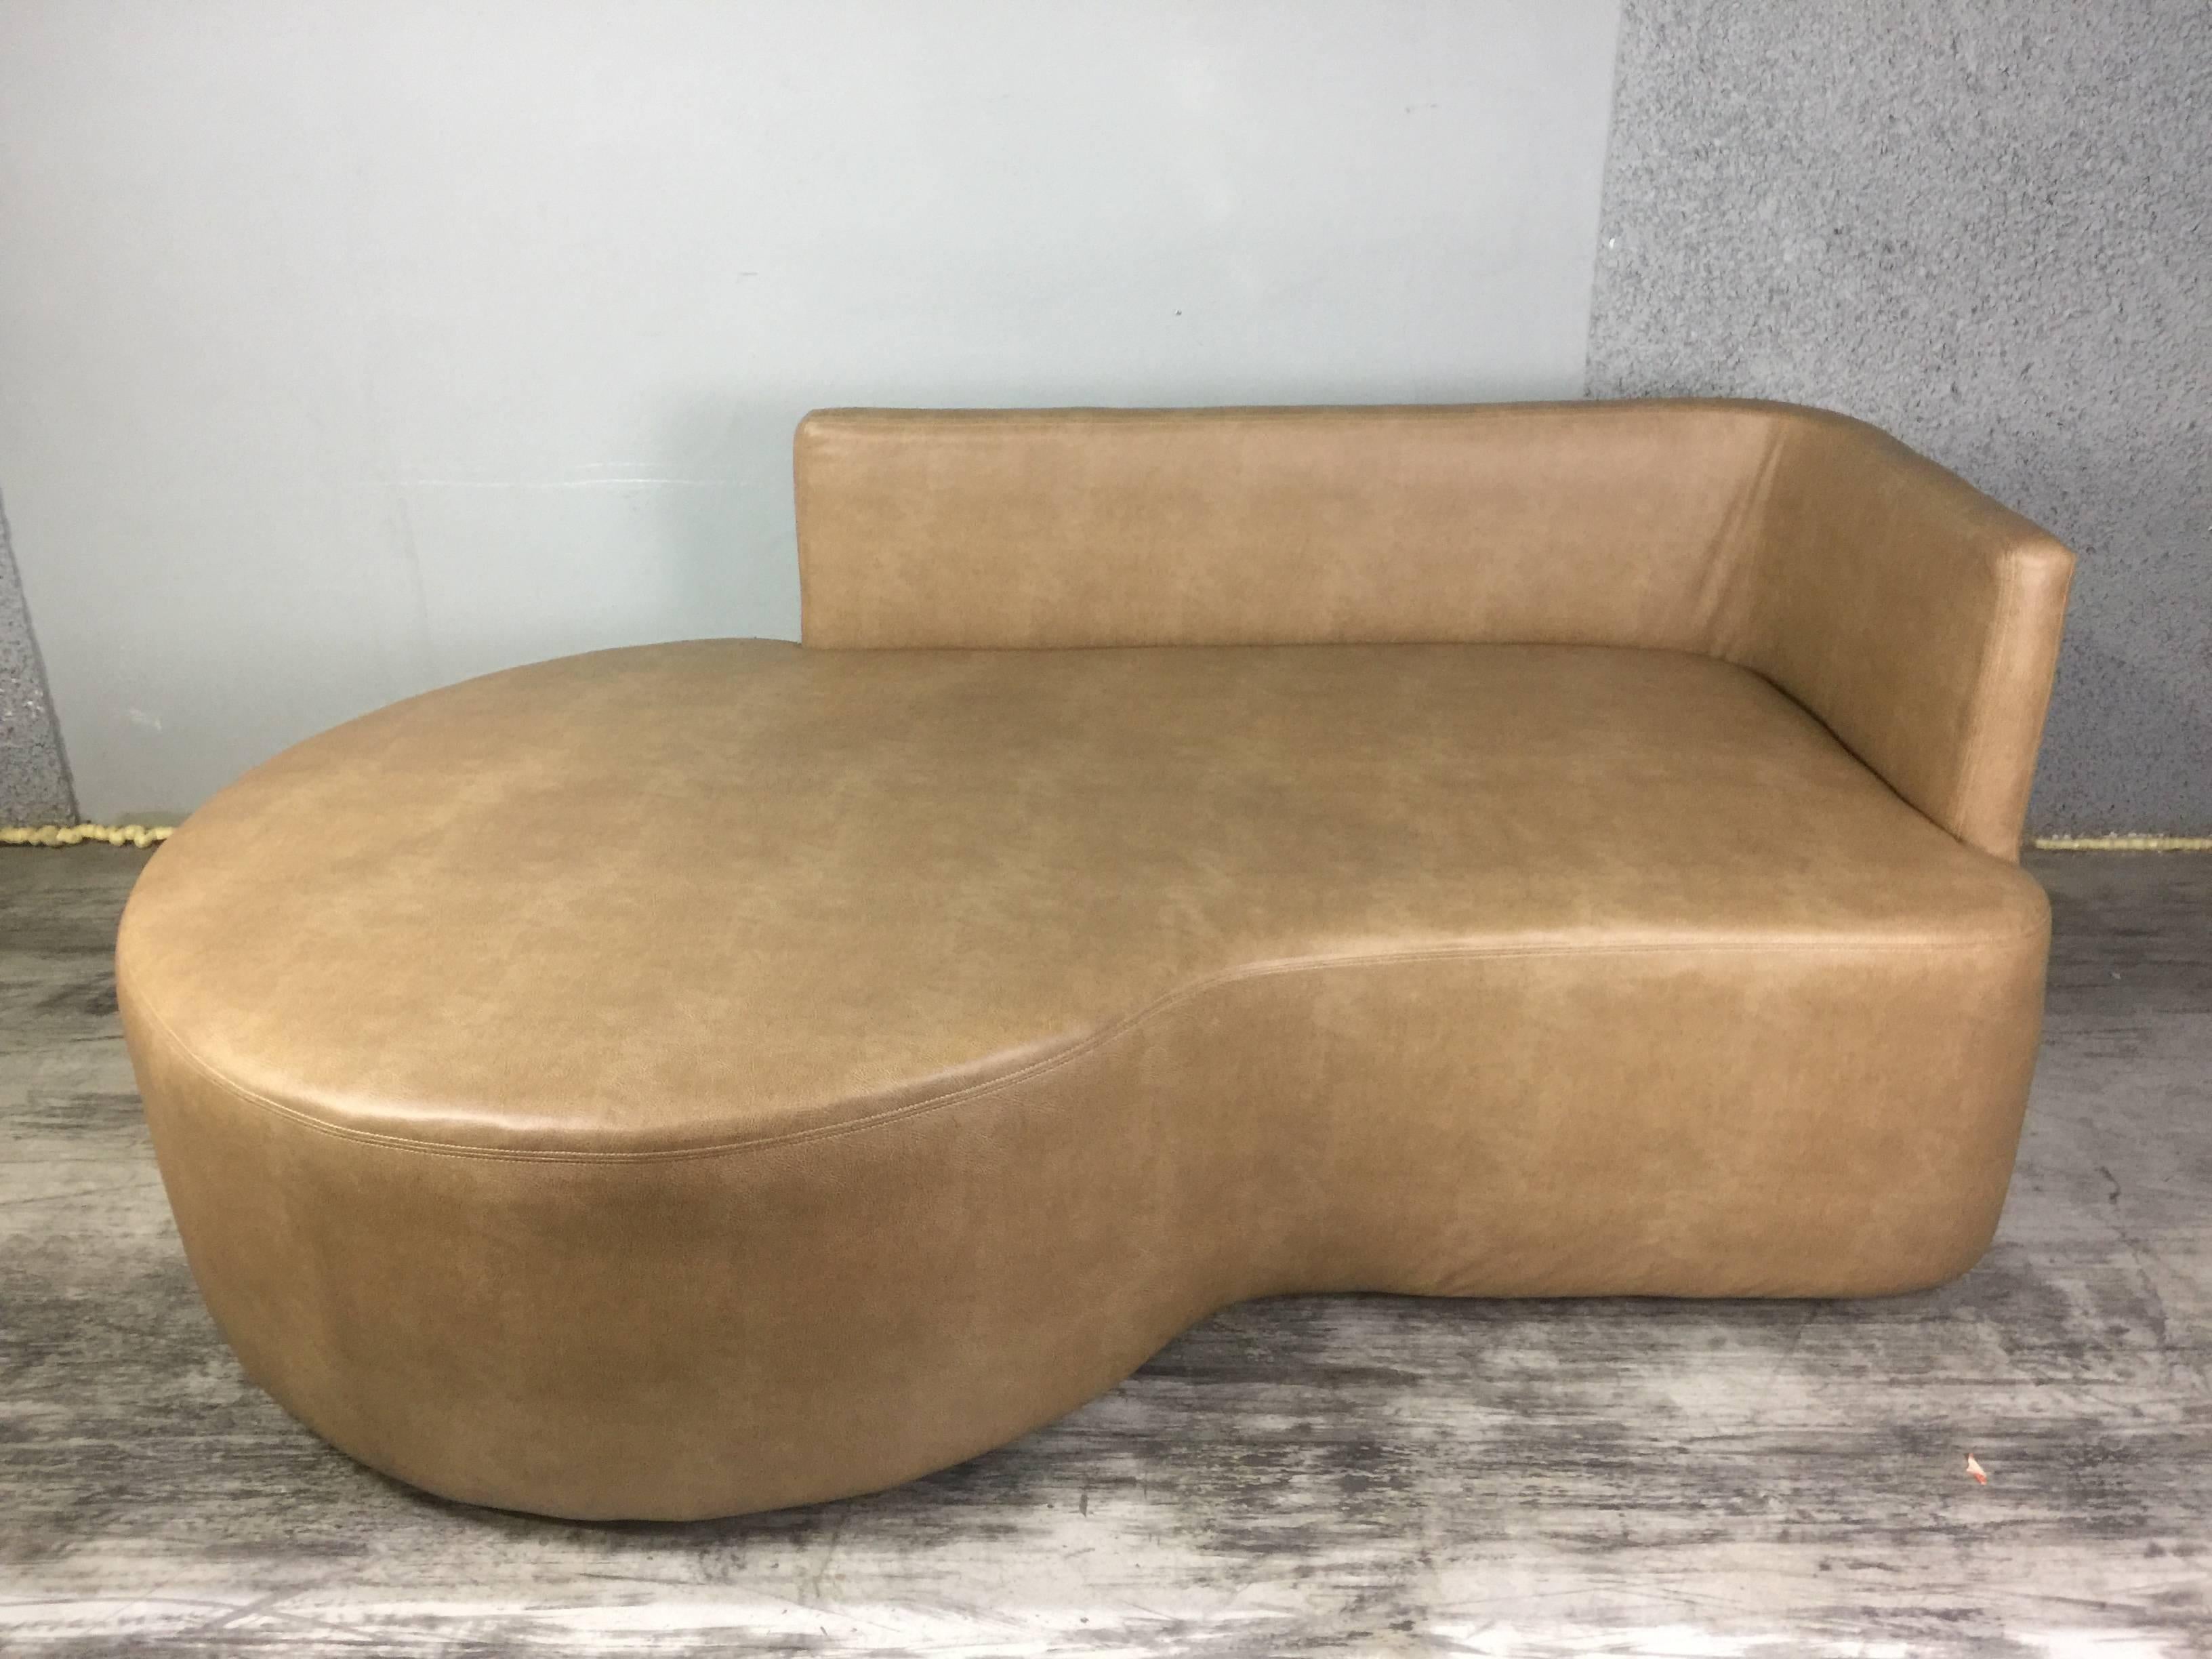 Kagan style saddle calfskin leather sofa, Sumptuous neutral saddle colored Calfskin leather upholstered asymmetrical sofa. The sofa measures 79" H x 31" H and has a varying depth from 33"-45.5" deep. The 3/4 backrest measures